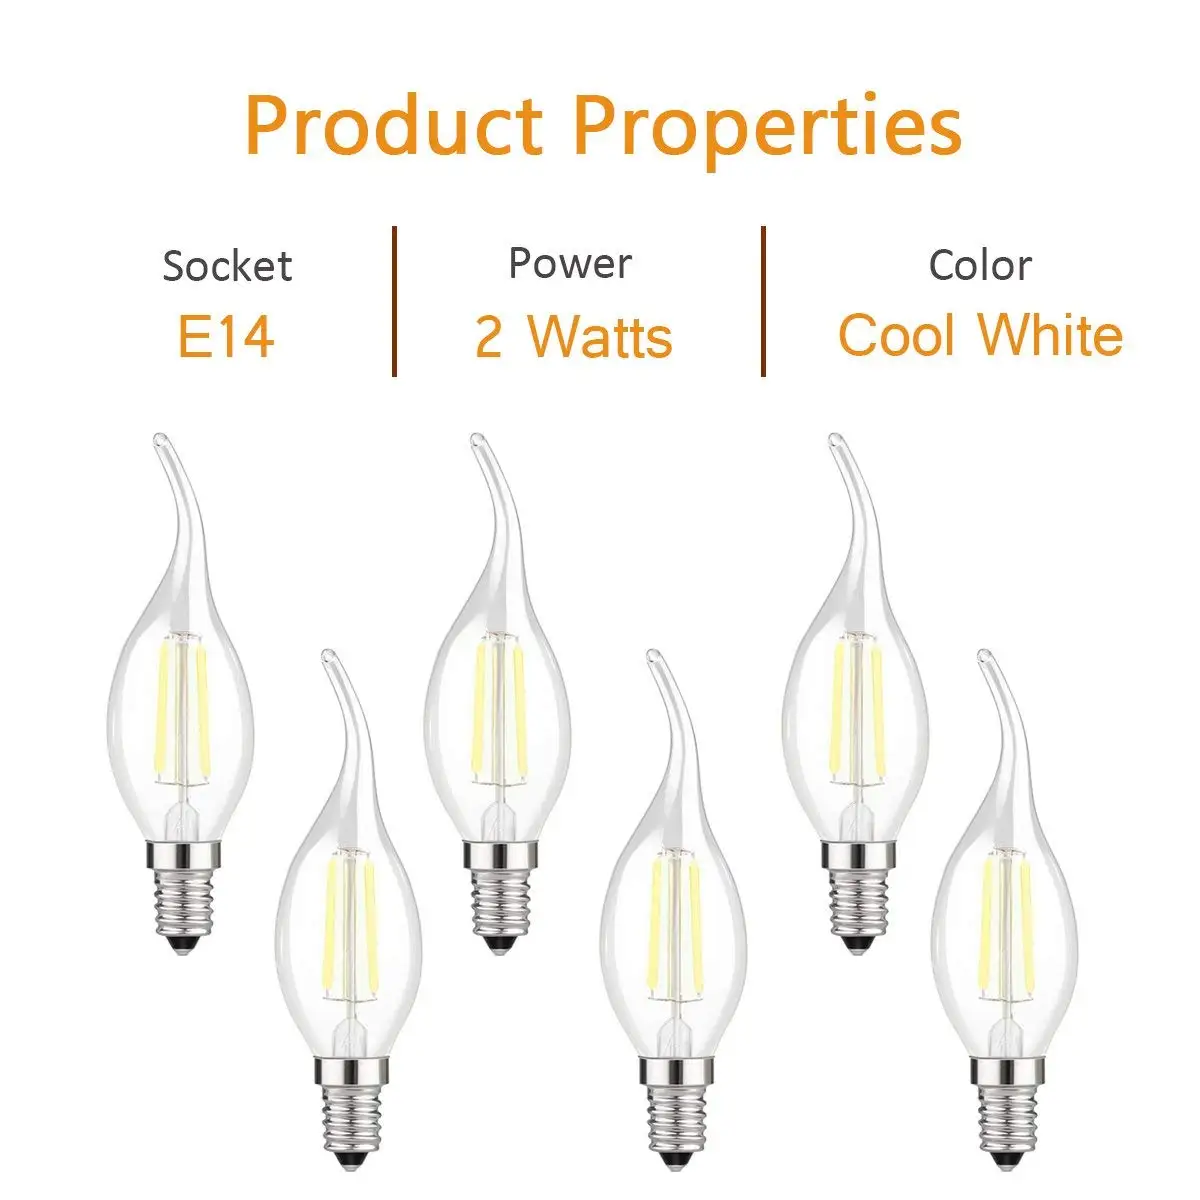 2 x 4w LED Clear Candle Filament Light Bulbs Lamp SES Small Screw In E14 40w 